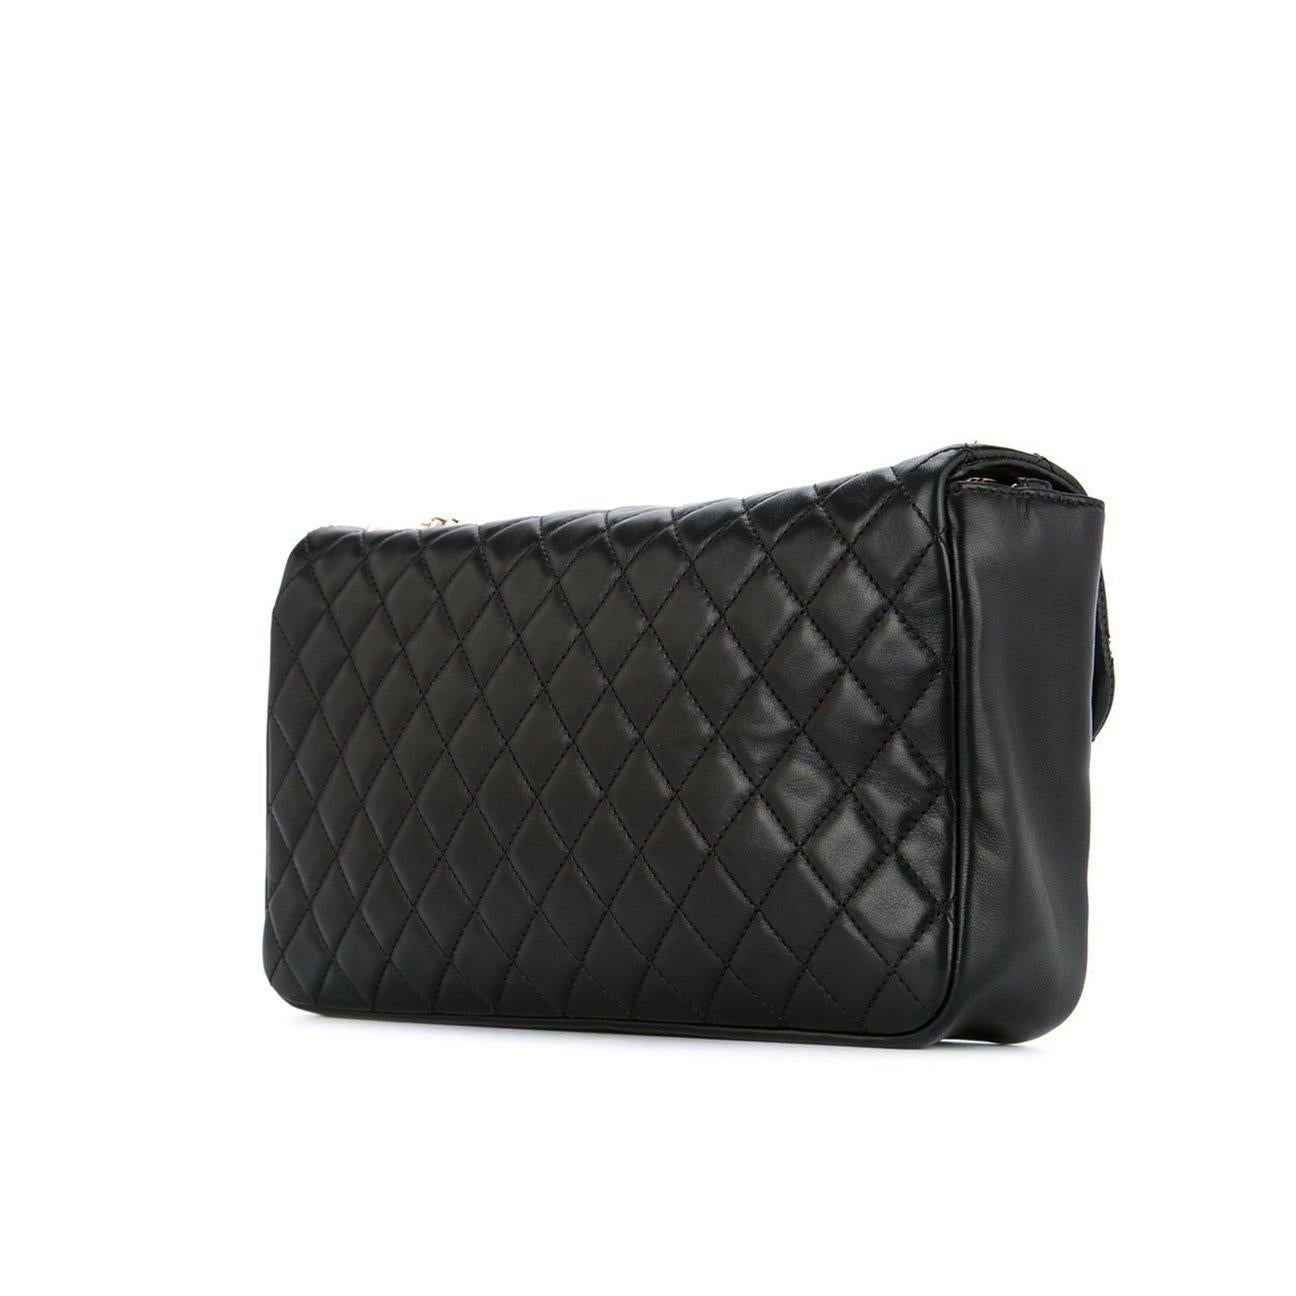 Diamond stitch Chanel quilted black lambskin flap with pearl CC logo and pearl chain

Year: 2010
Gold hardware
Magnetic clasp closure
Pearl details
Interior center zippered pocket
Interior grey canvas striped lining
6